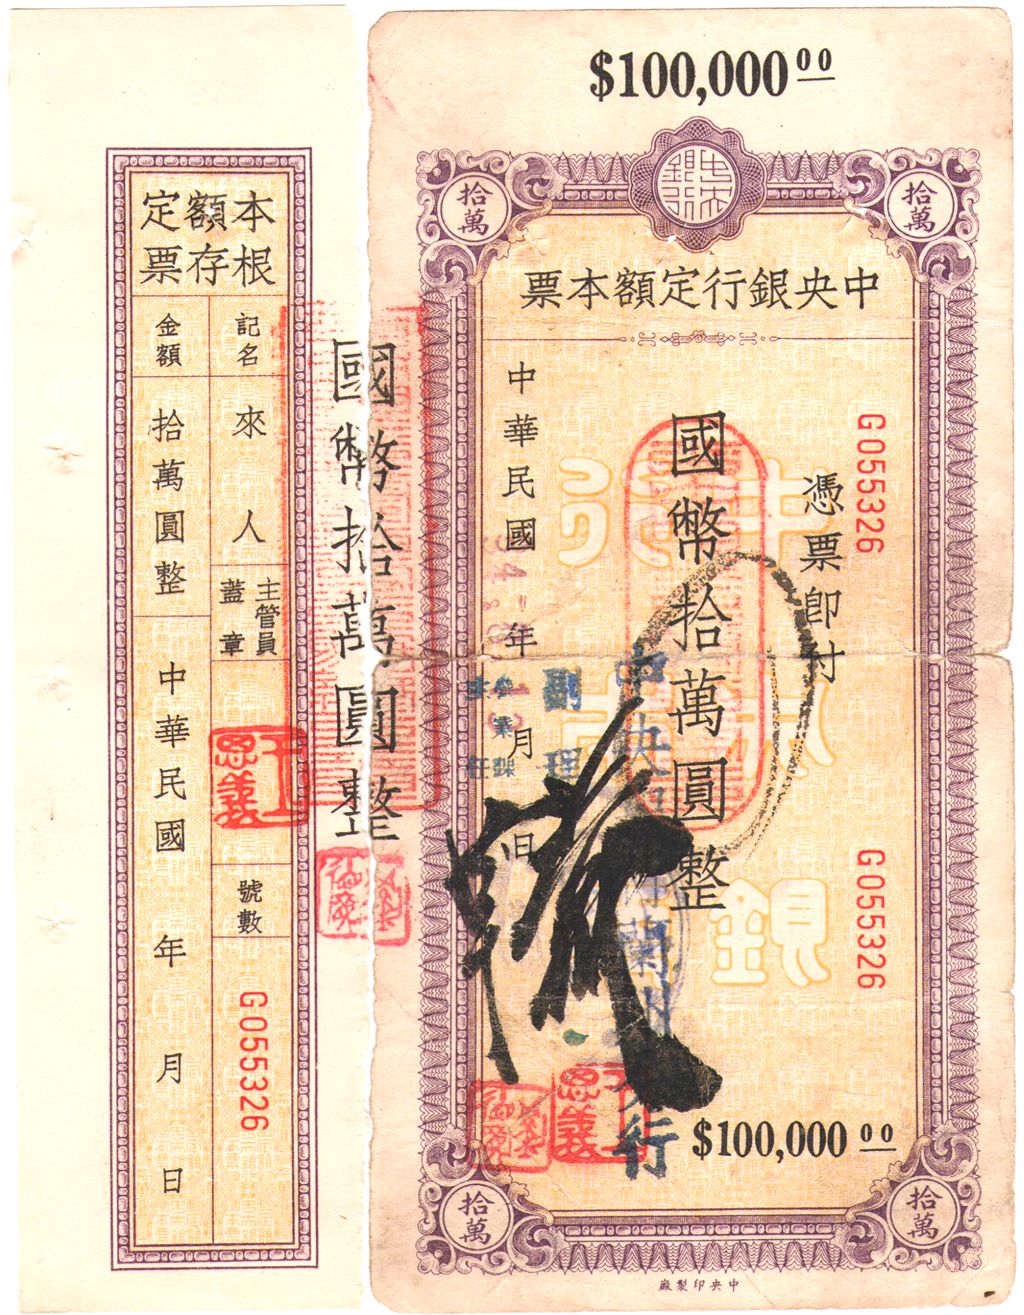 D3110, Central Bank of China, Cash Promissory Note 100,000 Dollars, 1945